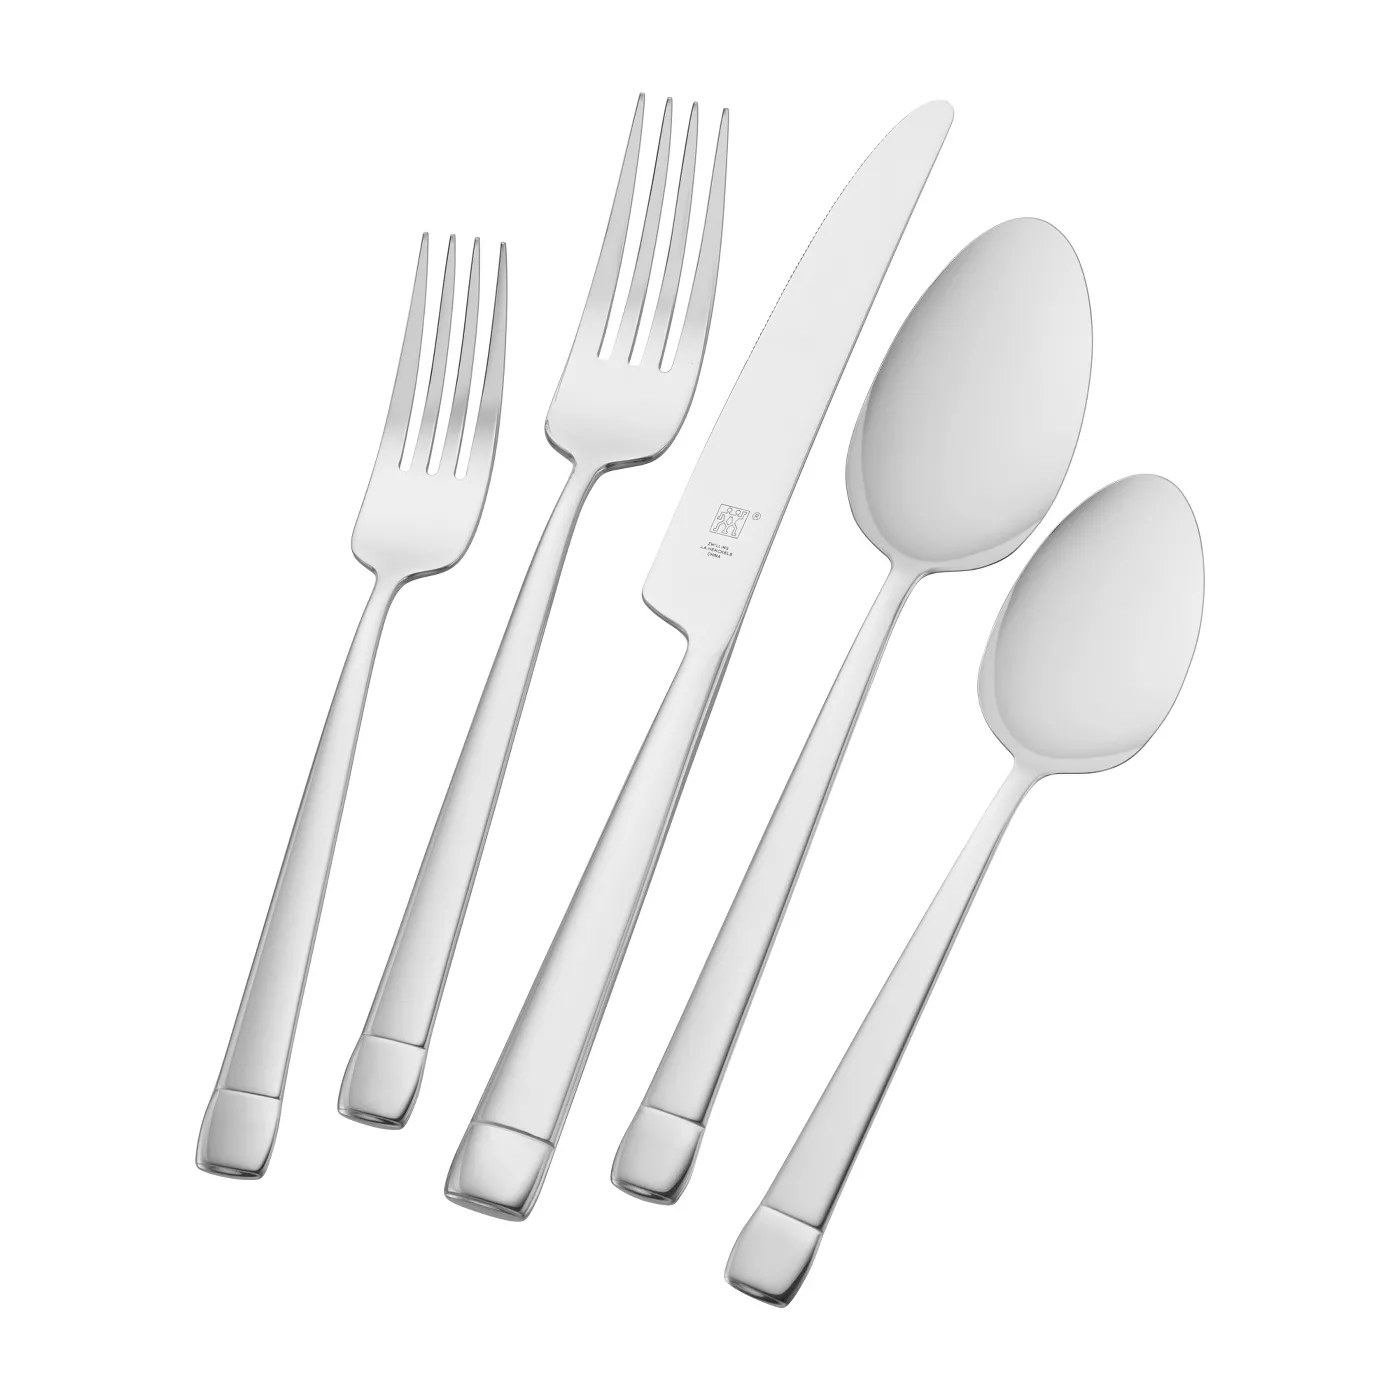 Five pieces of the stainless steel flatware